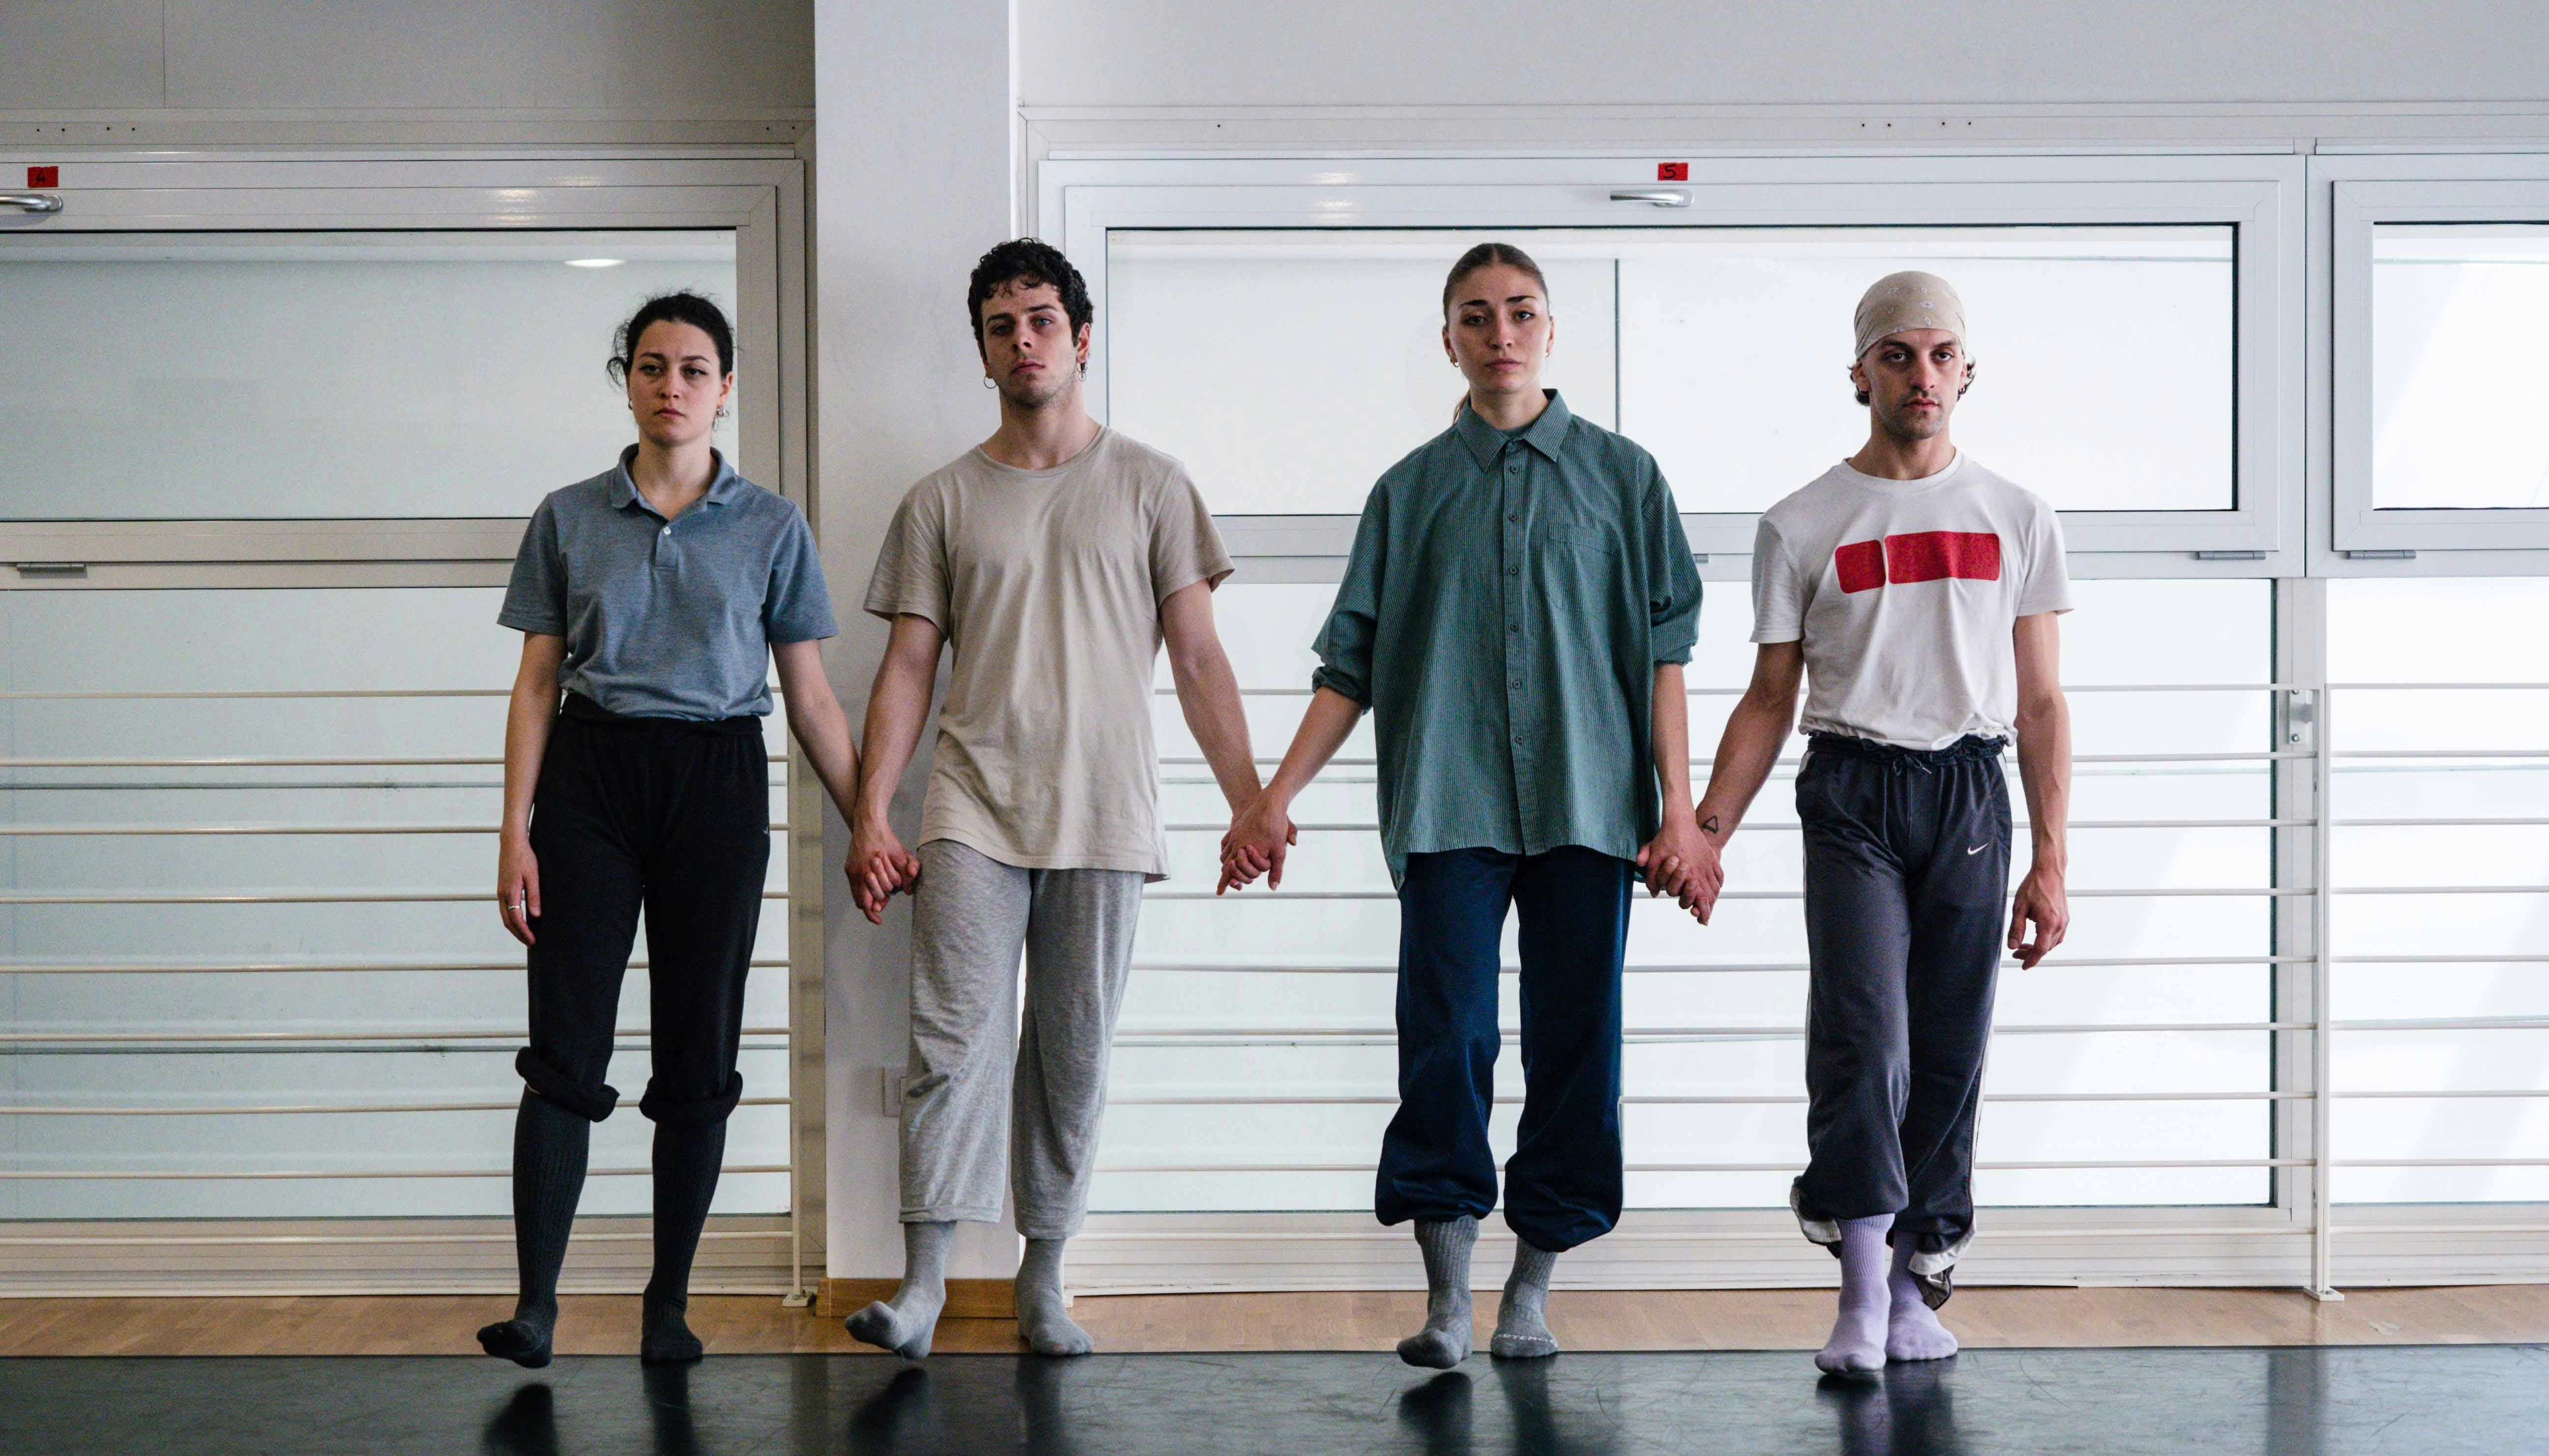 The four performers chosen by Tedesco hold hands walking forward